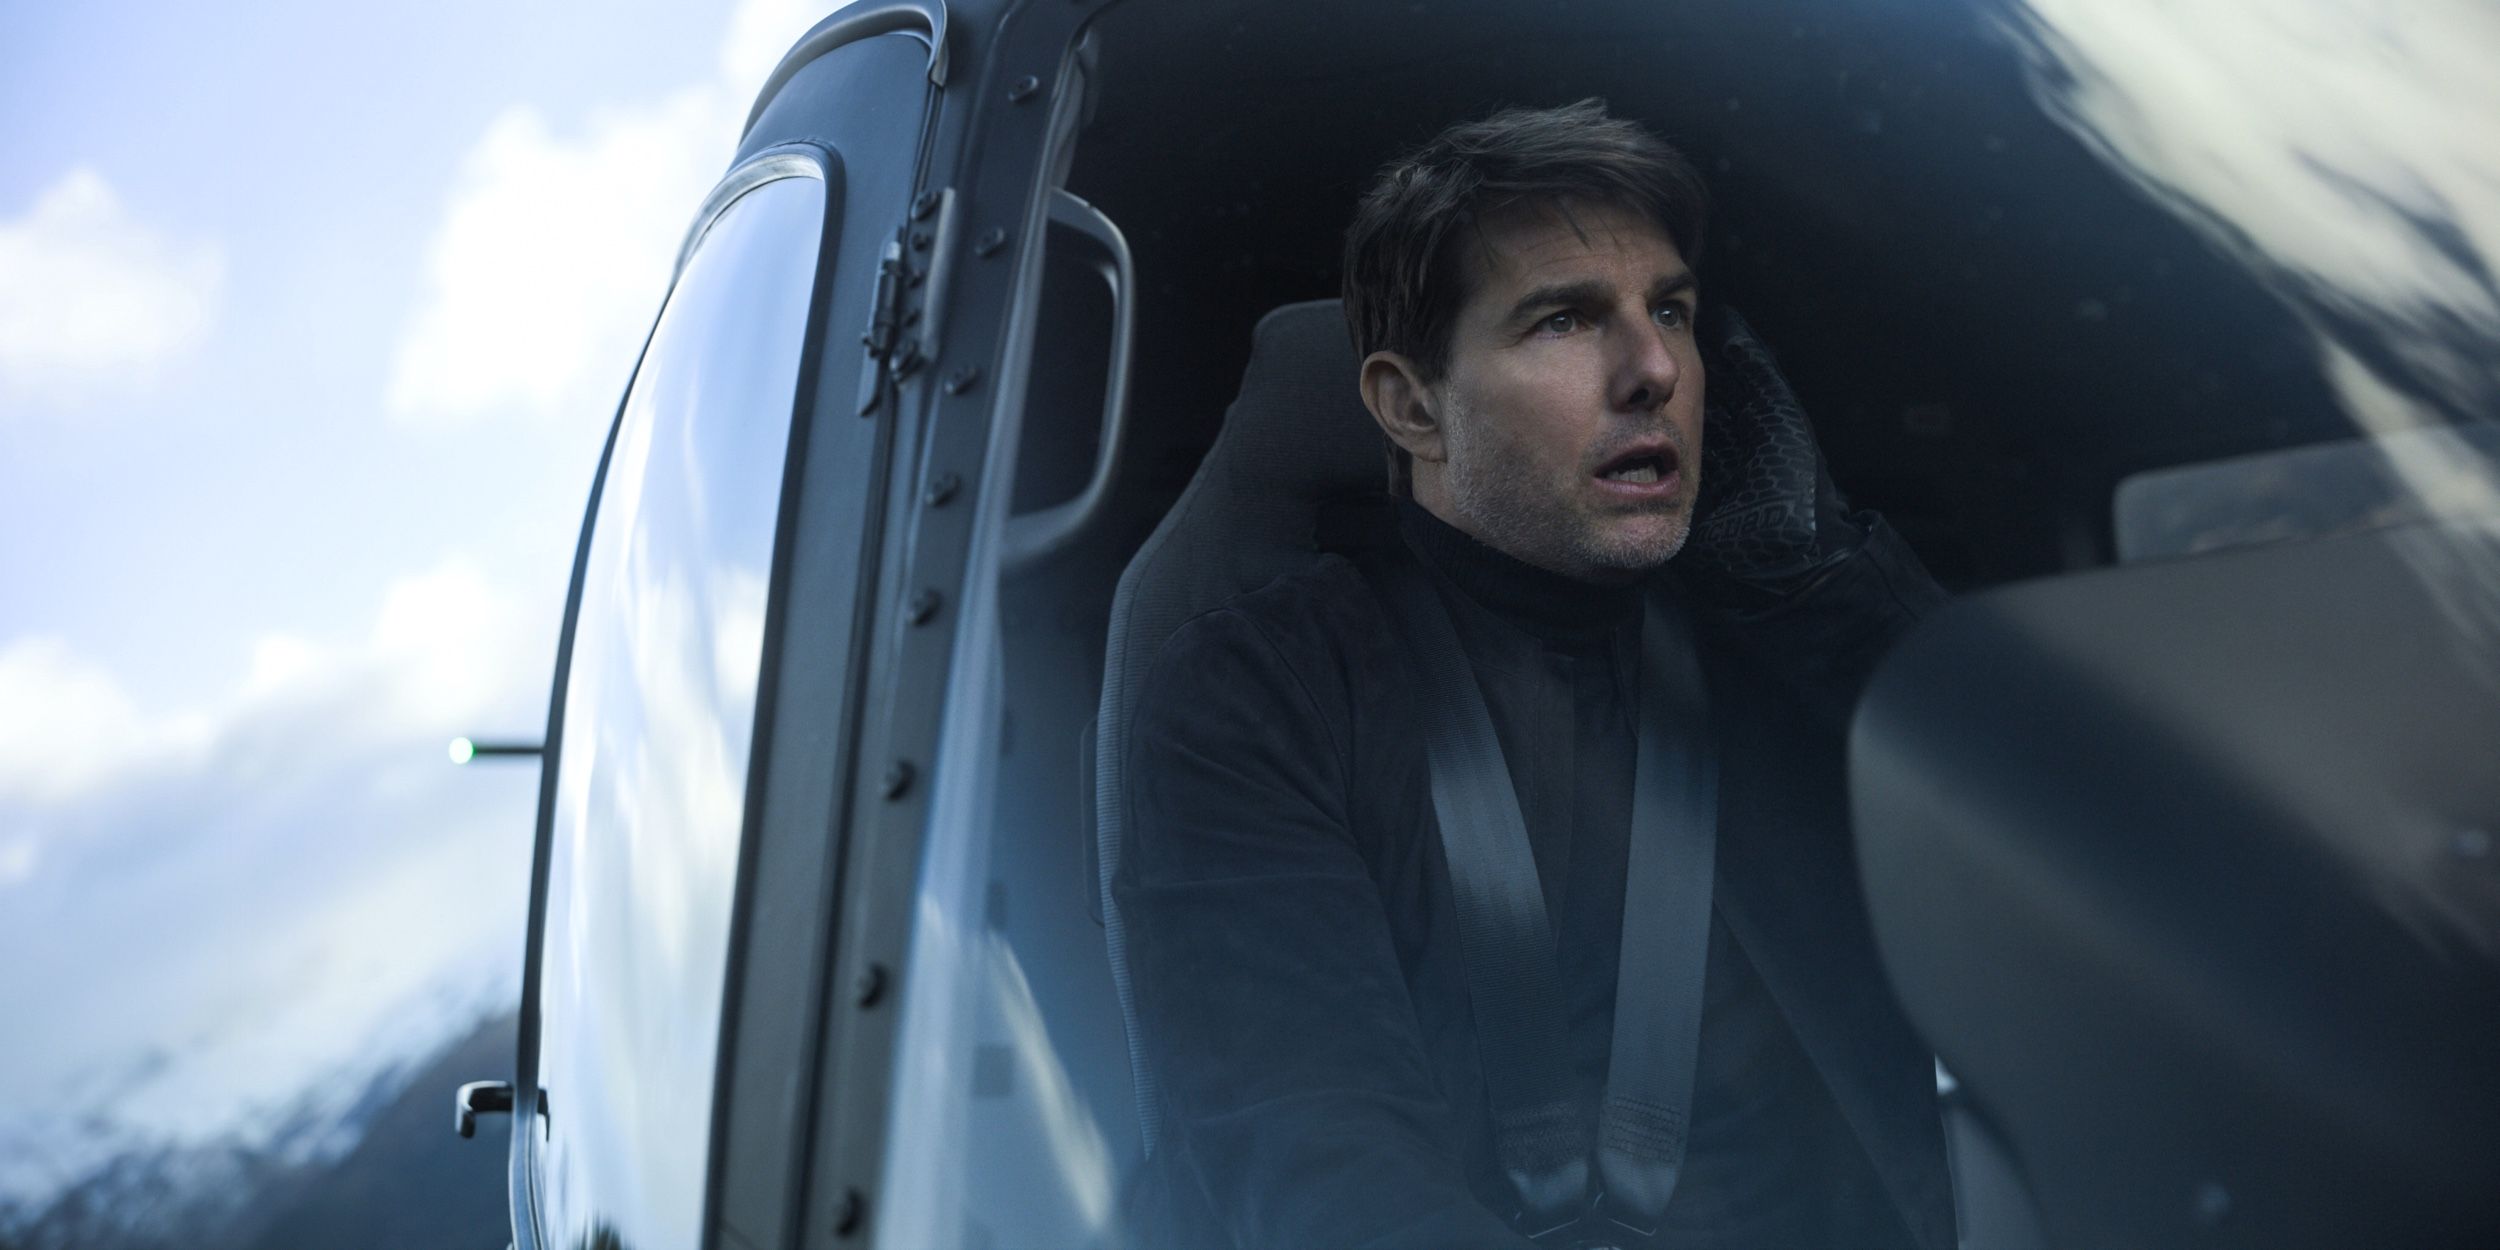 Tom Cruise in the Mission Impossible Fallout helicopter scene